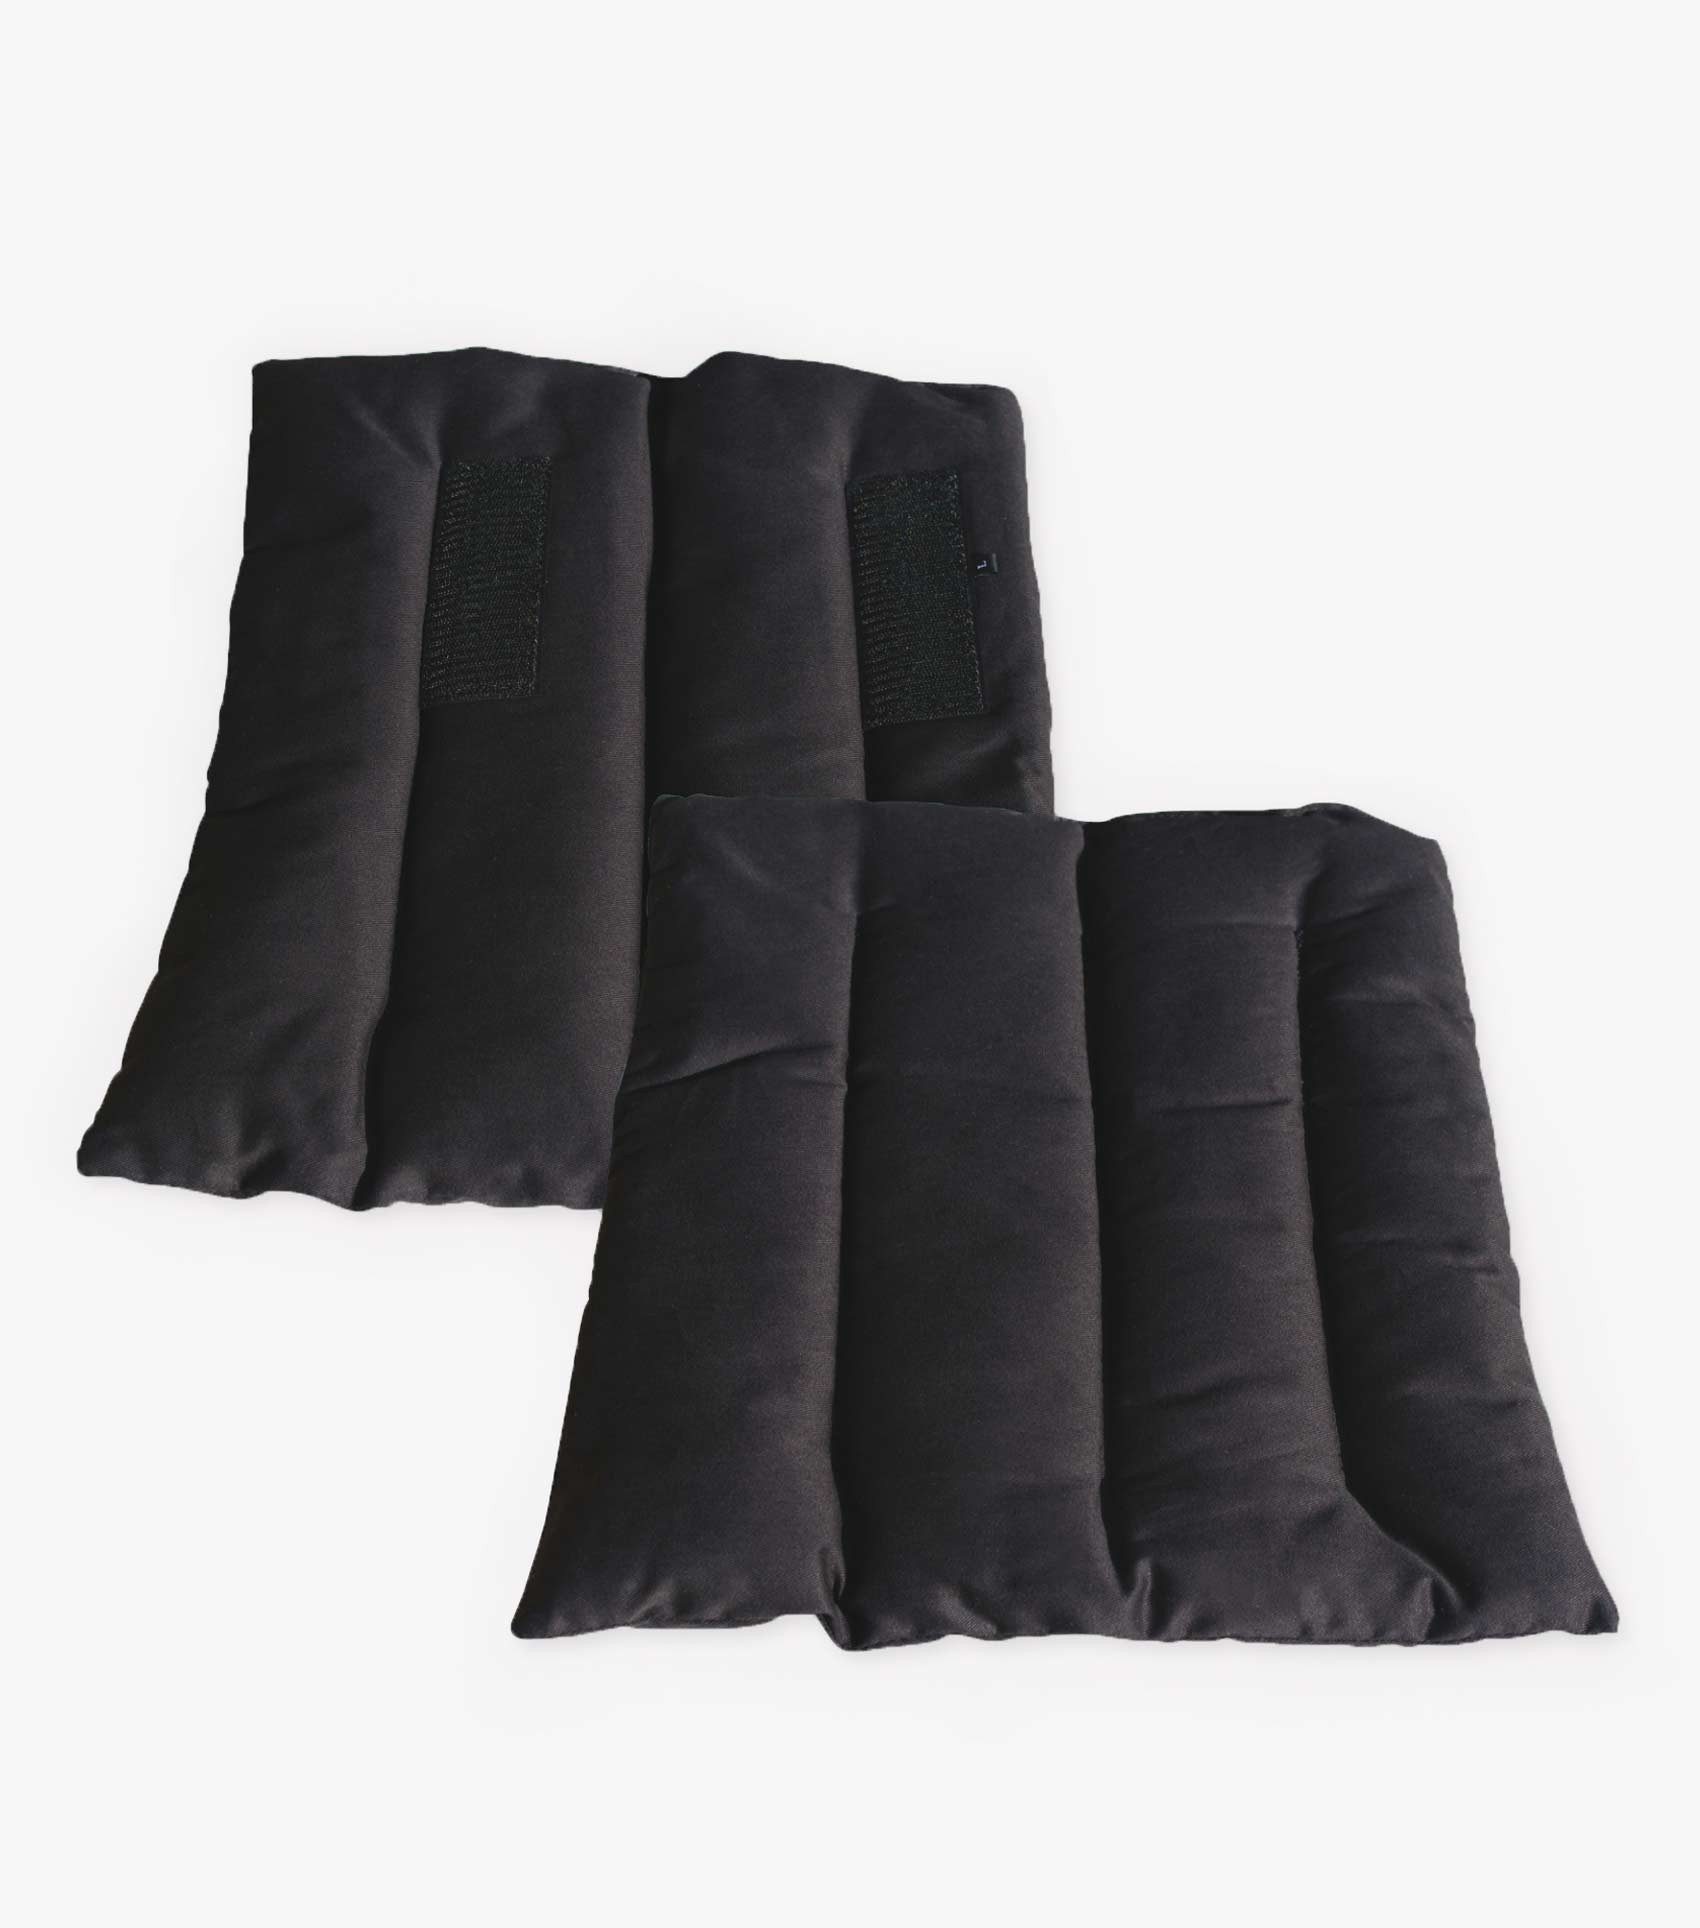 P.E STABLE BOOT WRAP LINERS